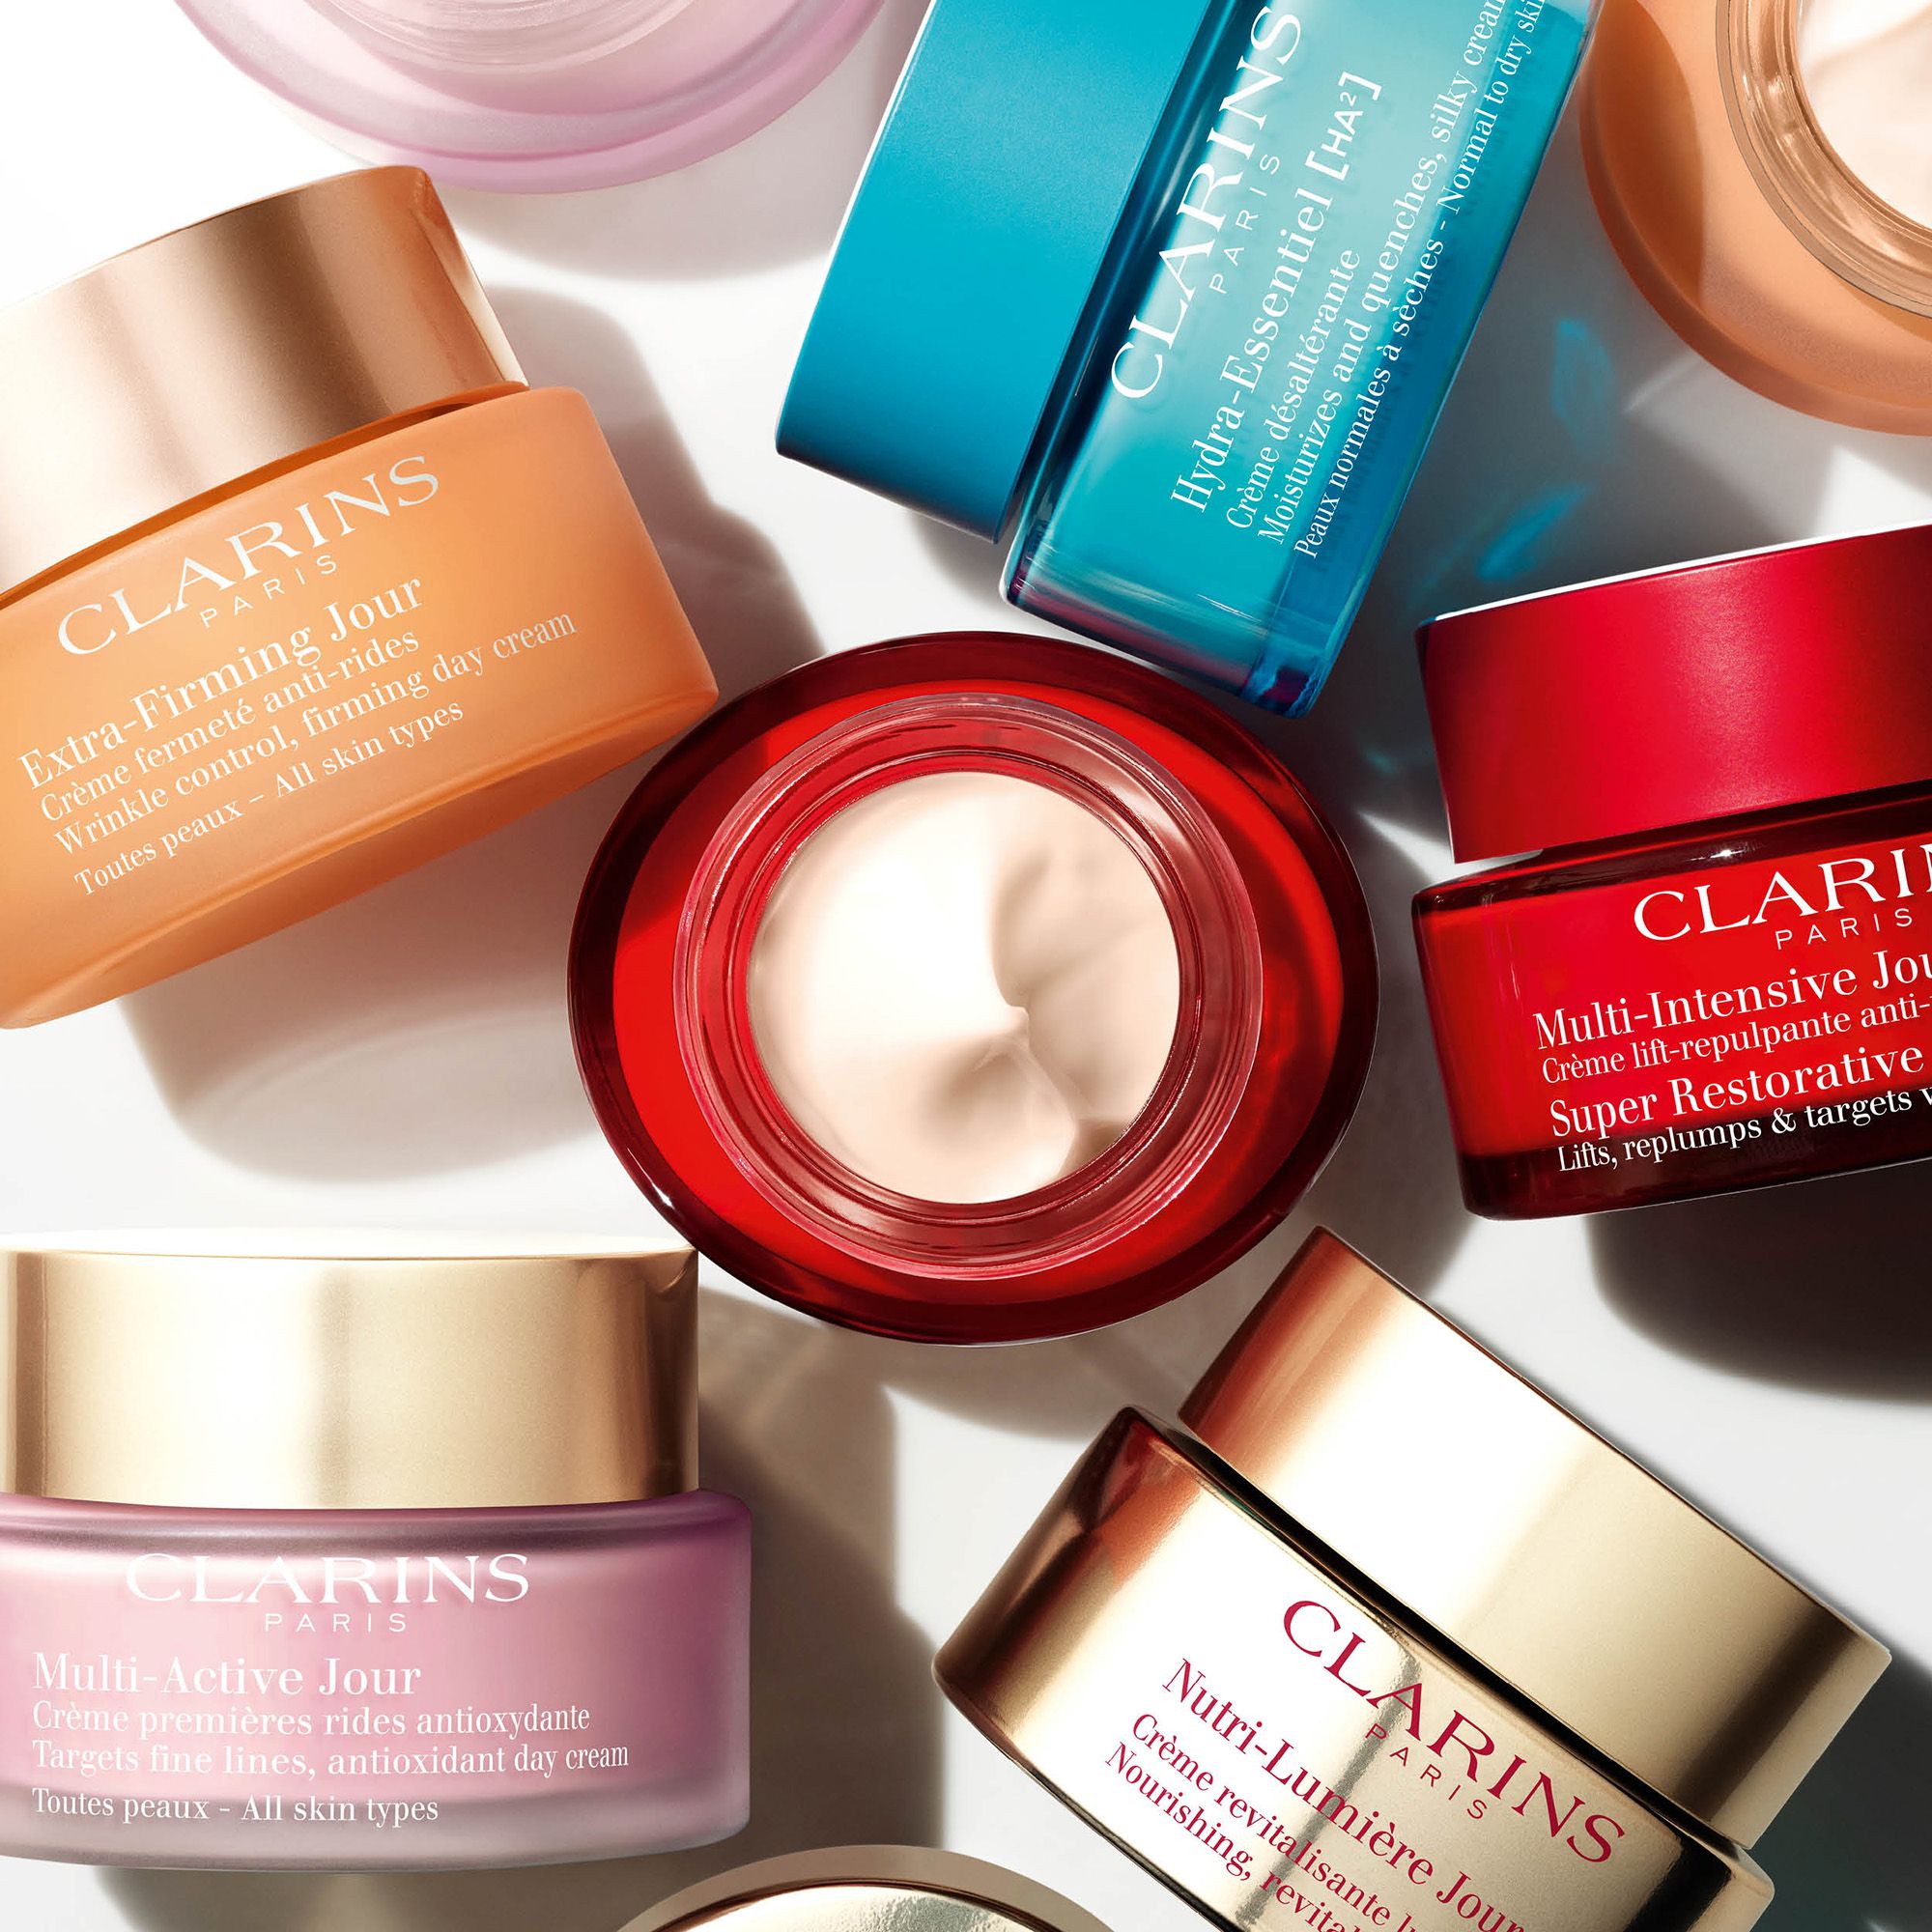 Clarins product